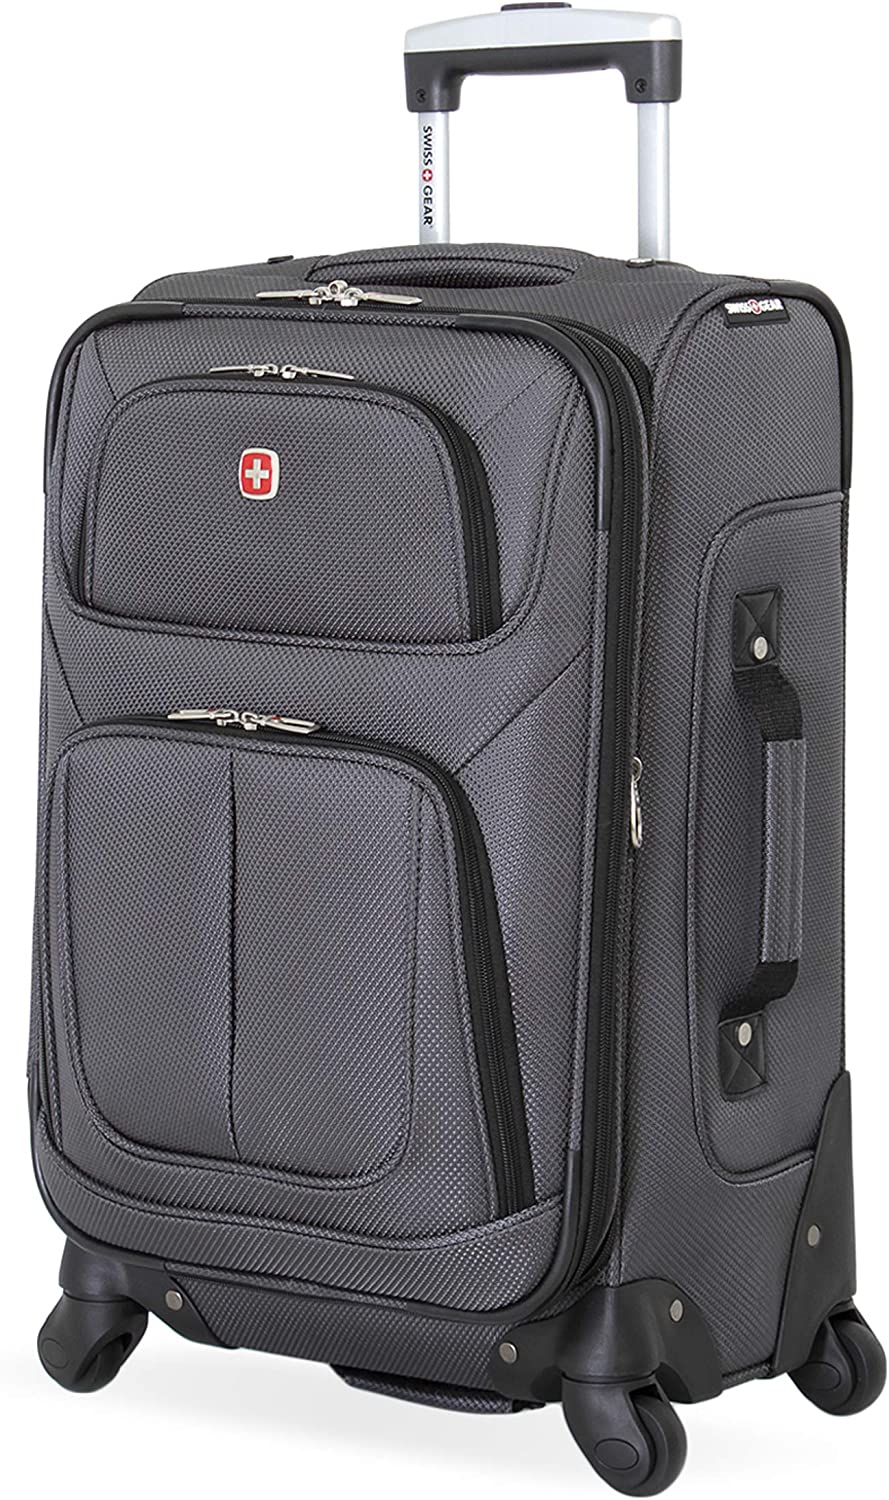 SwissGear Rolling Multidirectional Carry On Suitcase, 21-Inch